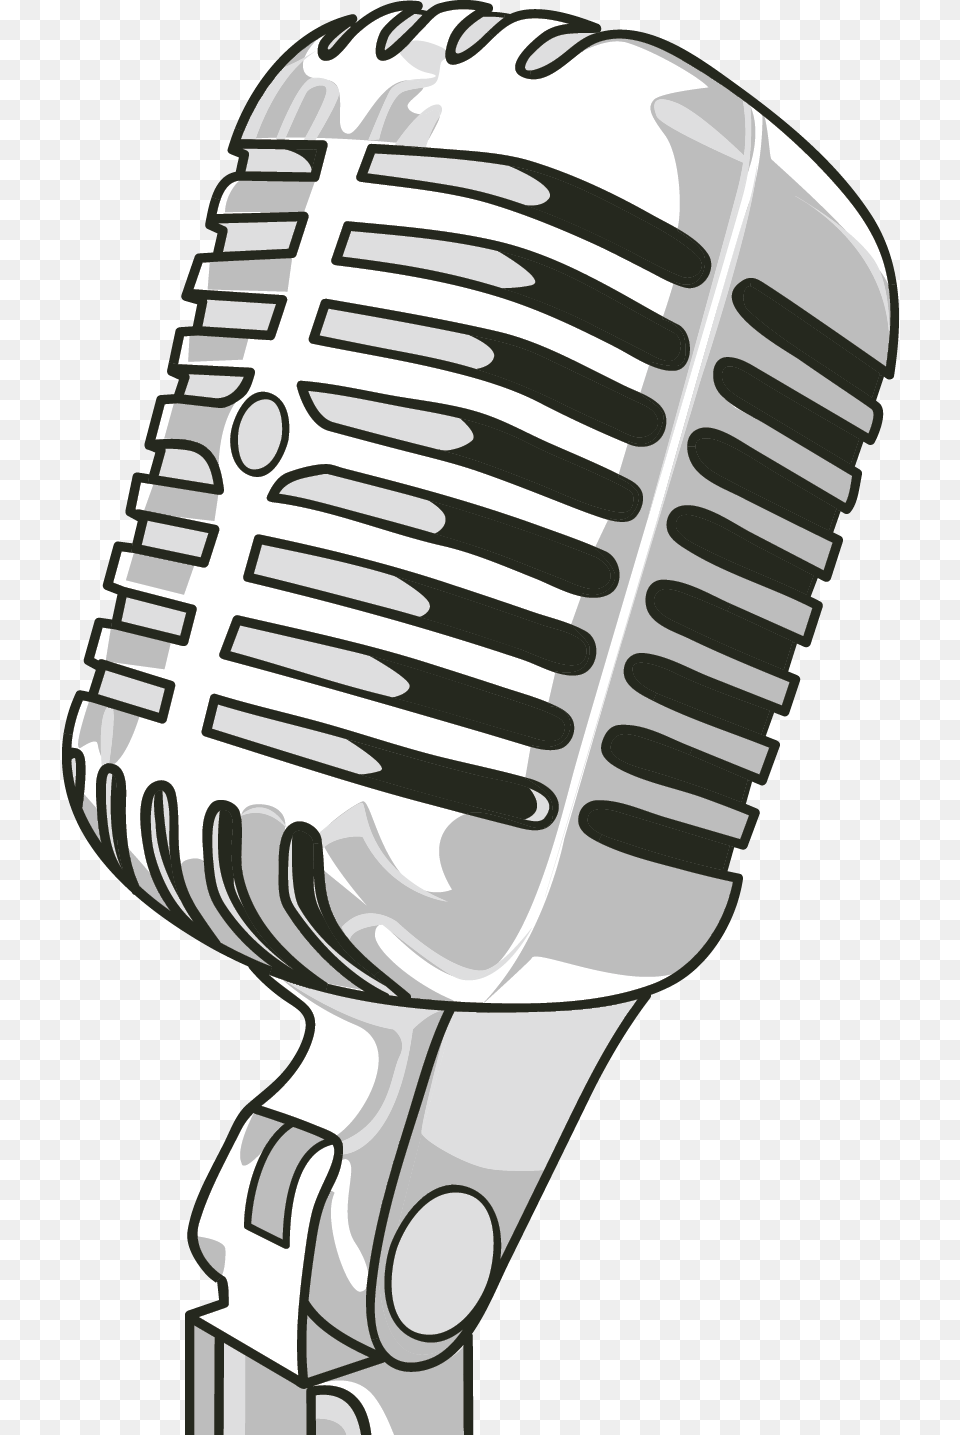 Radio Microphone Clip Art Microphone Clipart, Electrical Device, Smoke Pipe Png Image